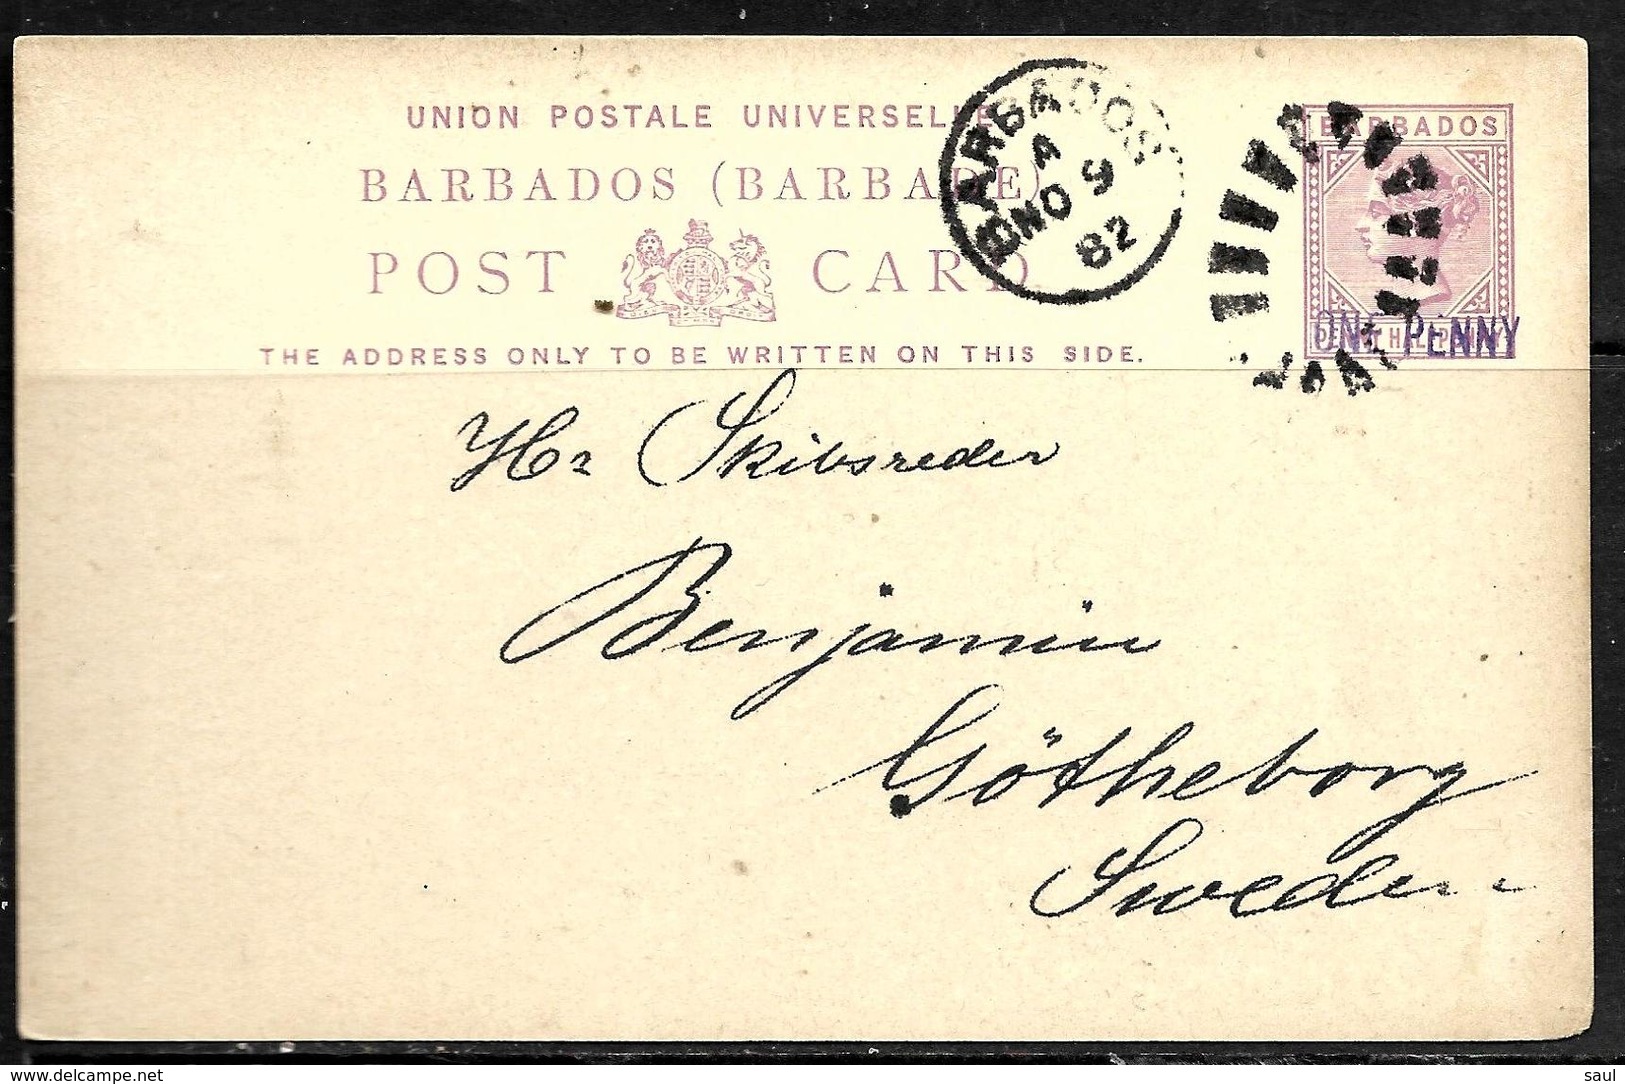 697 - BARBADOS - 1882 - STATIONERY CARD TO SWEDEN - TO CHECK - Unclassified